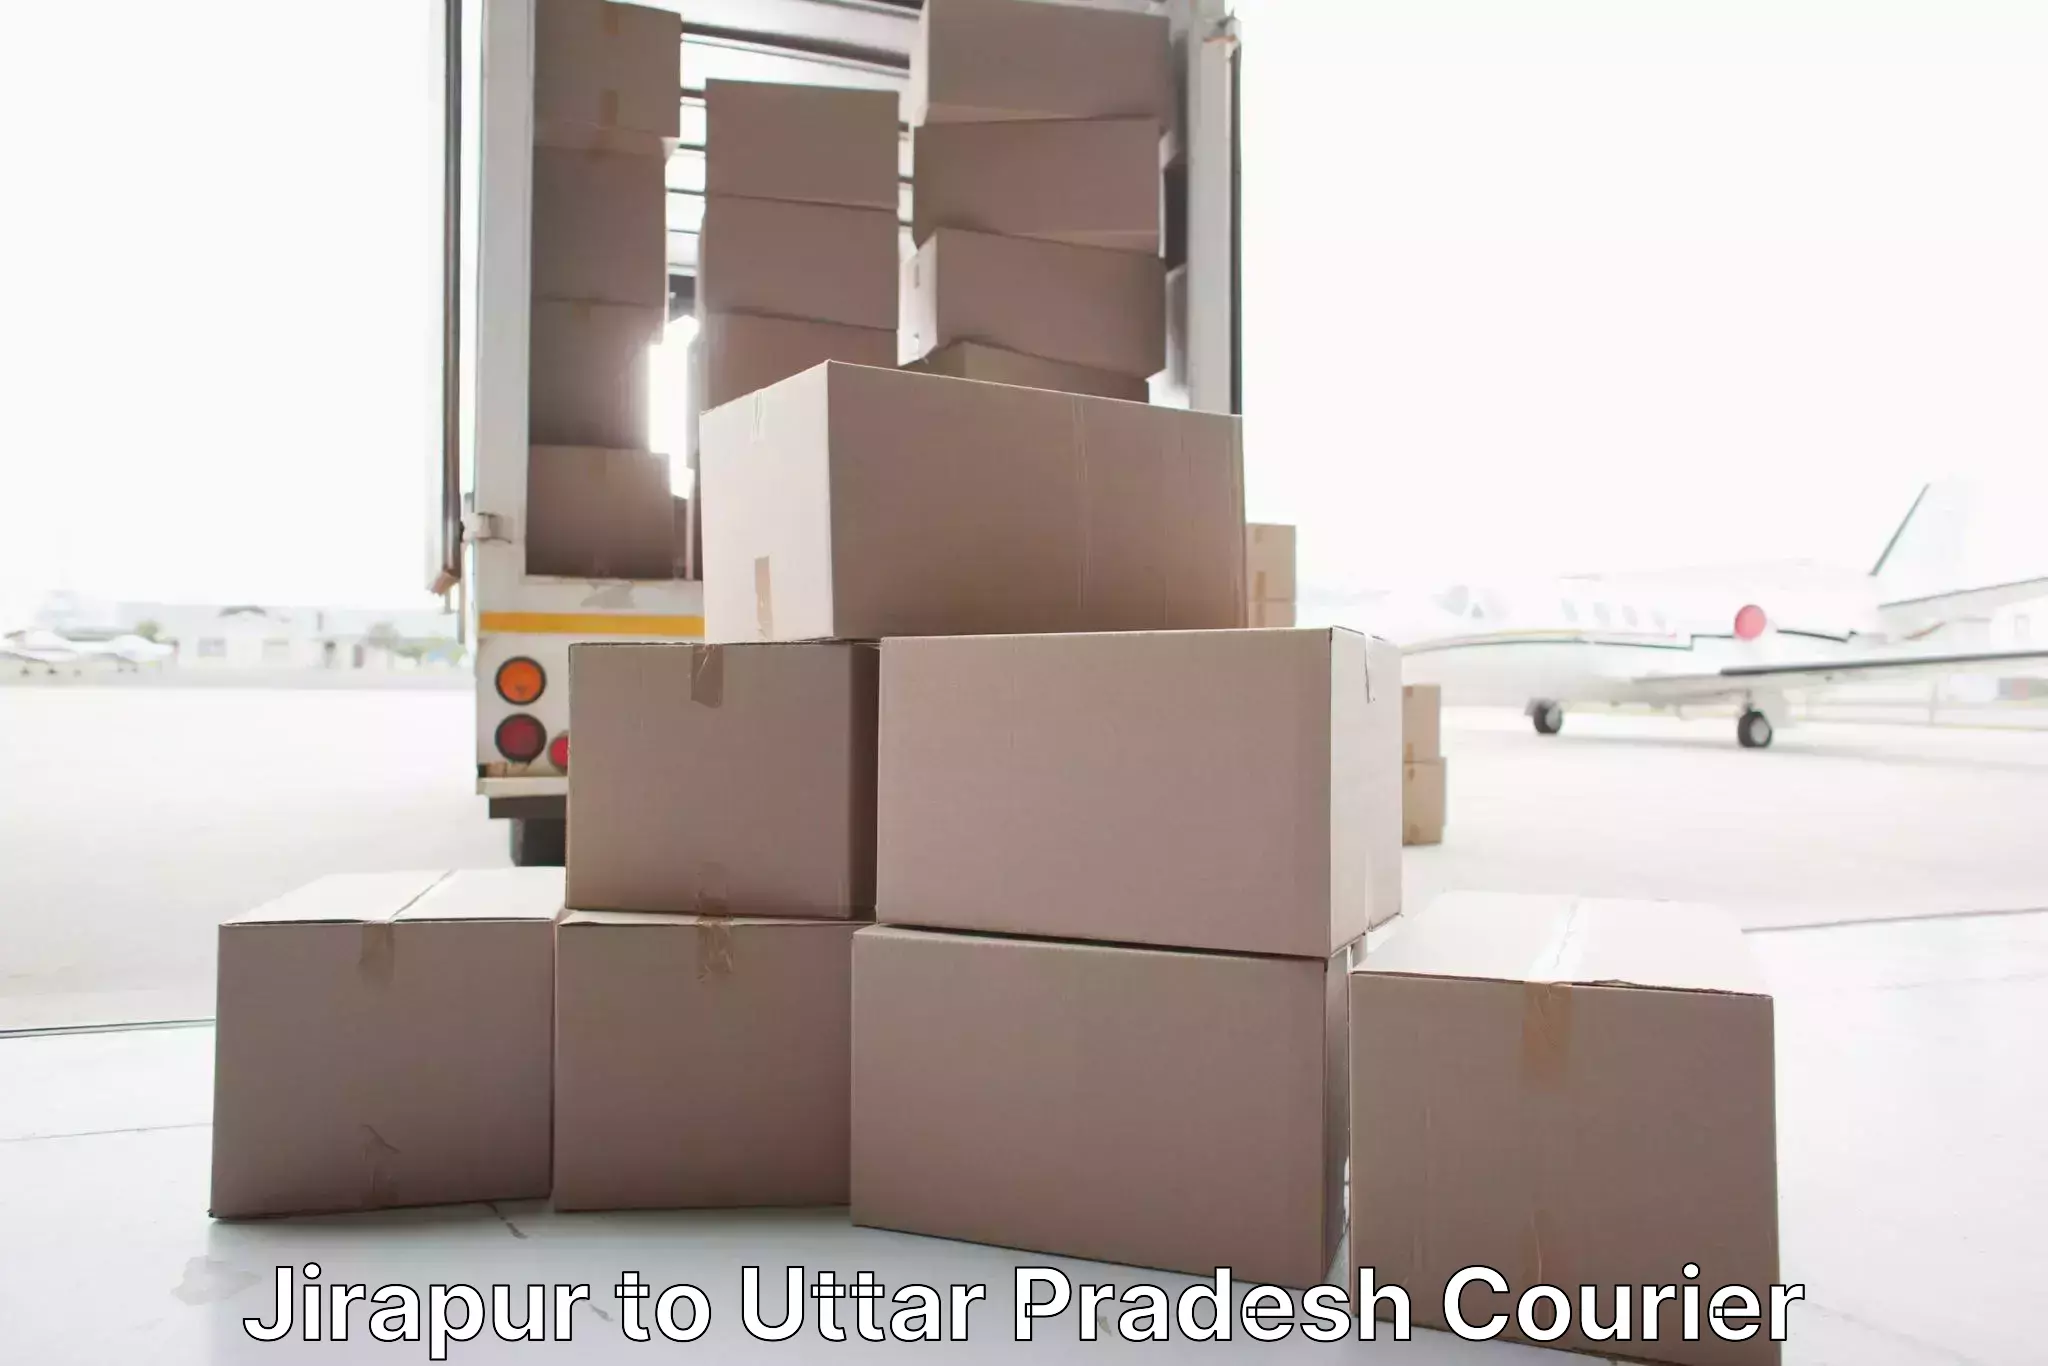 High-quality moving services Jirapur to Jaunpur